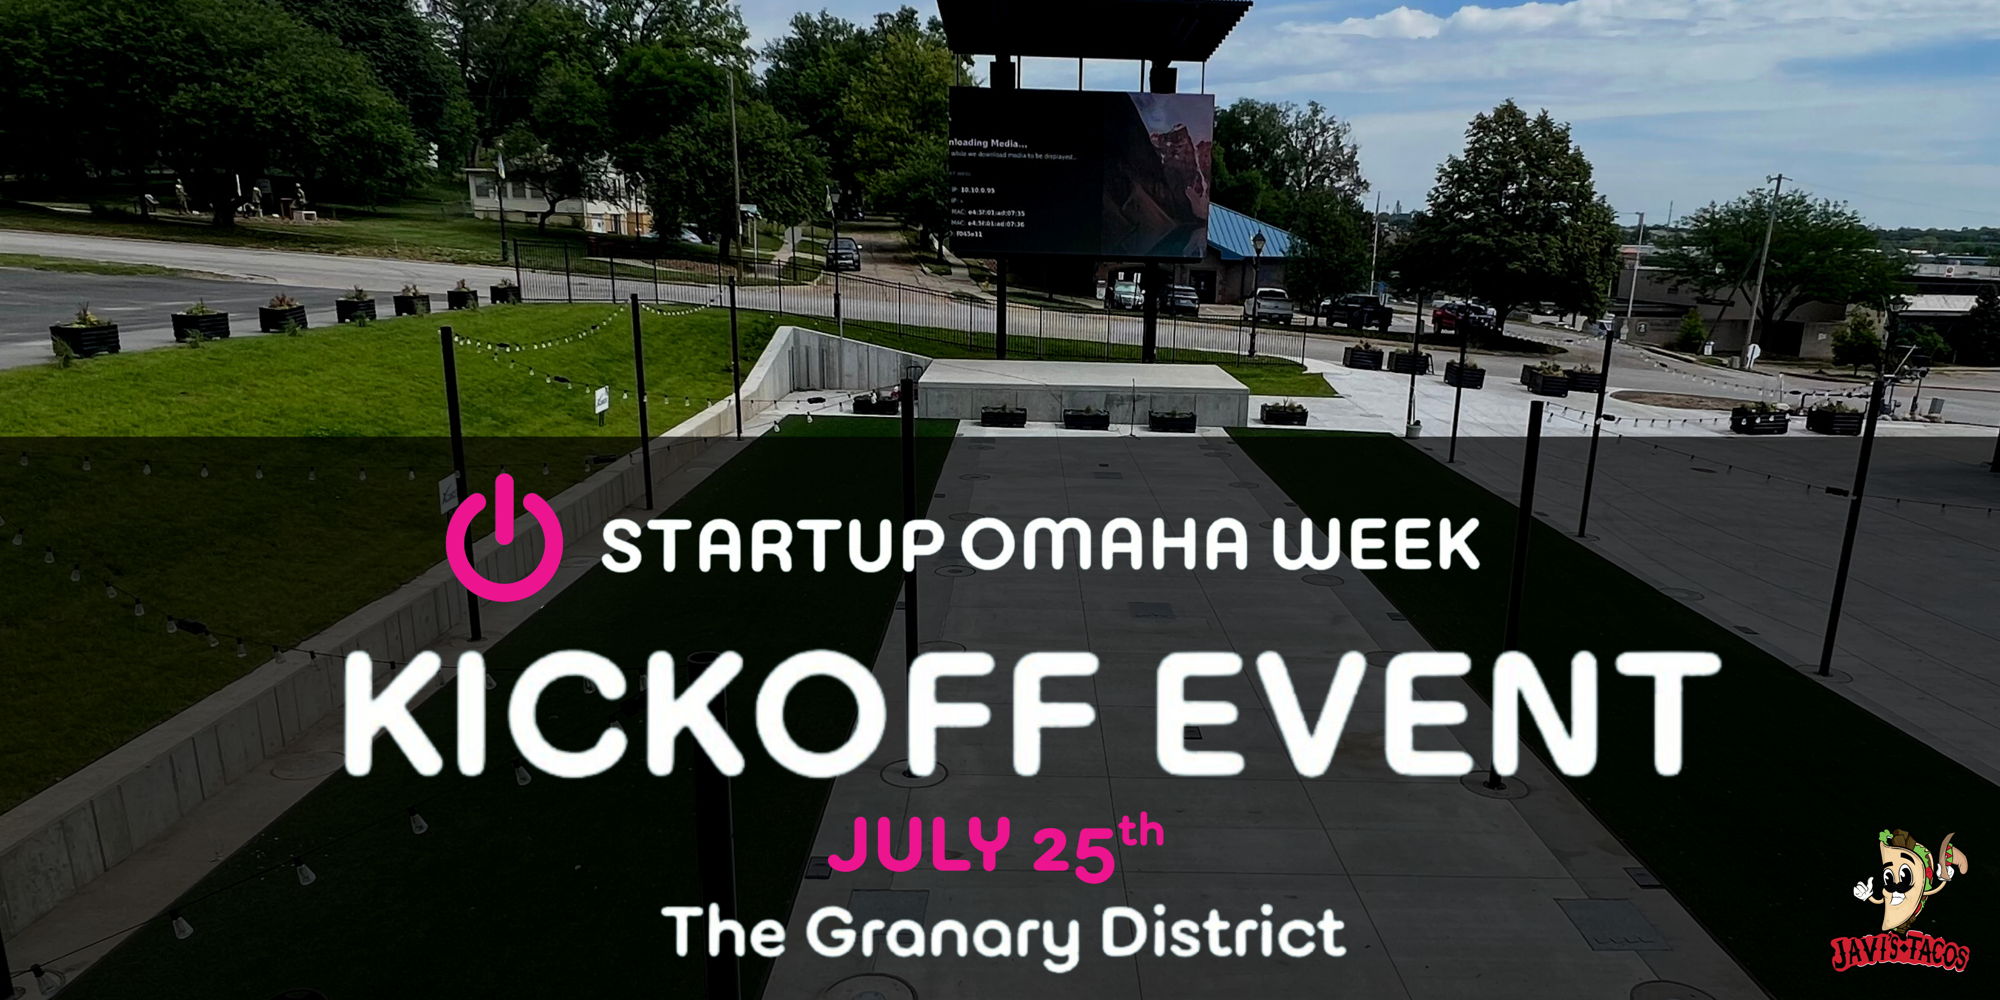 Startup Omaha Week - Kickoff Event promotional image